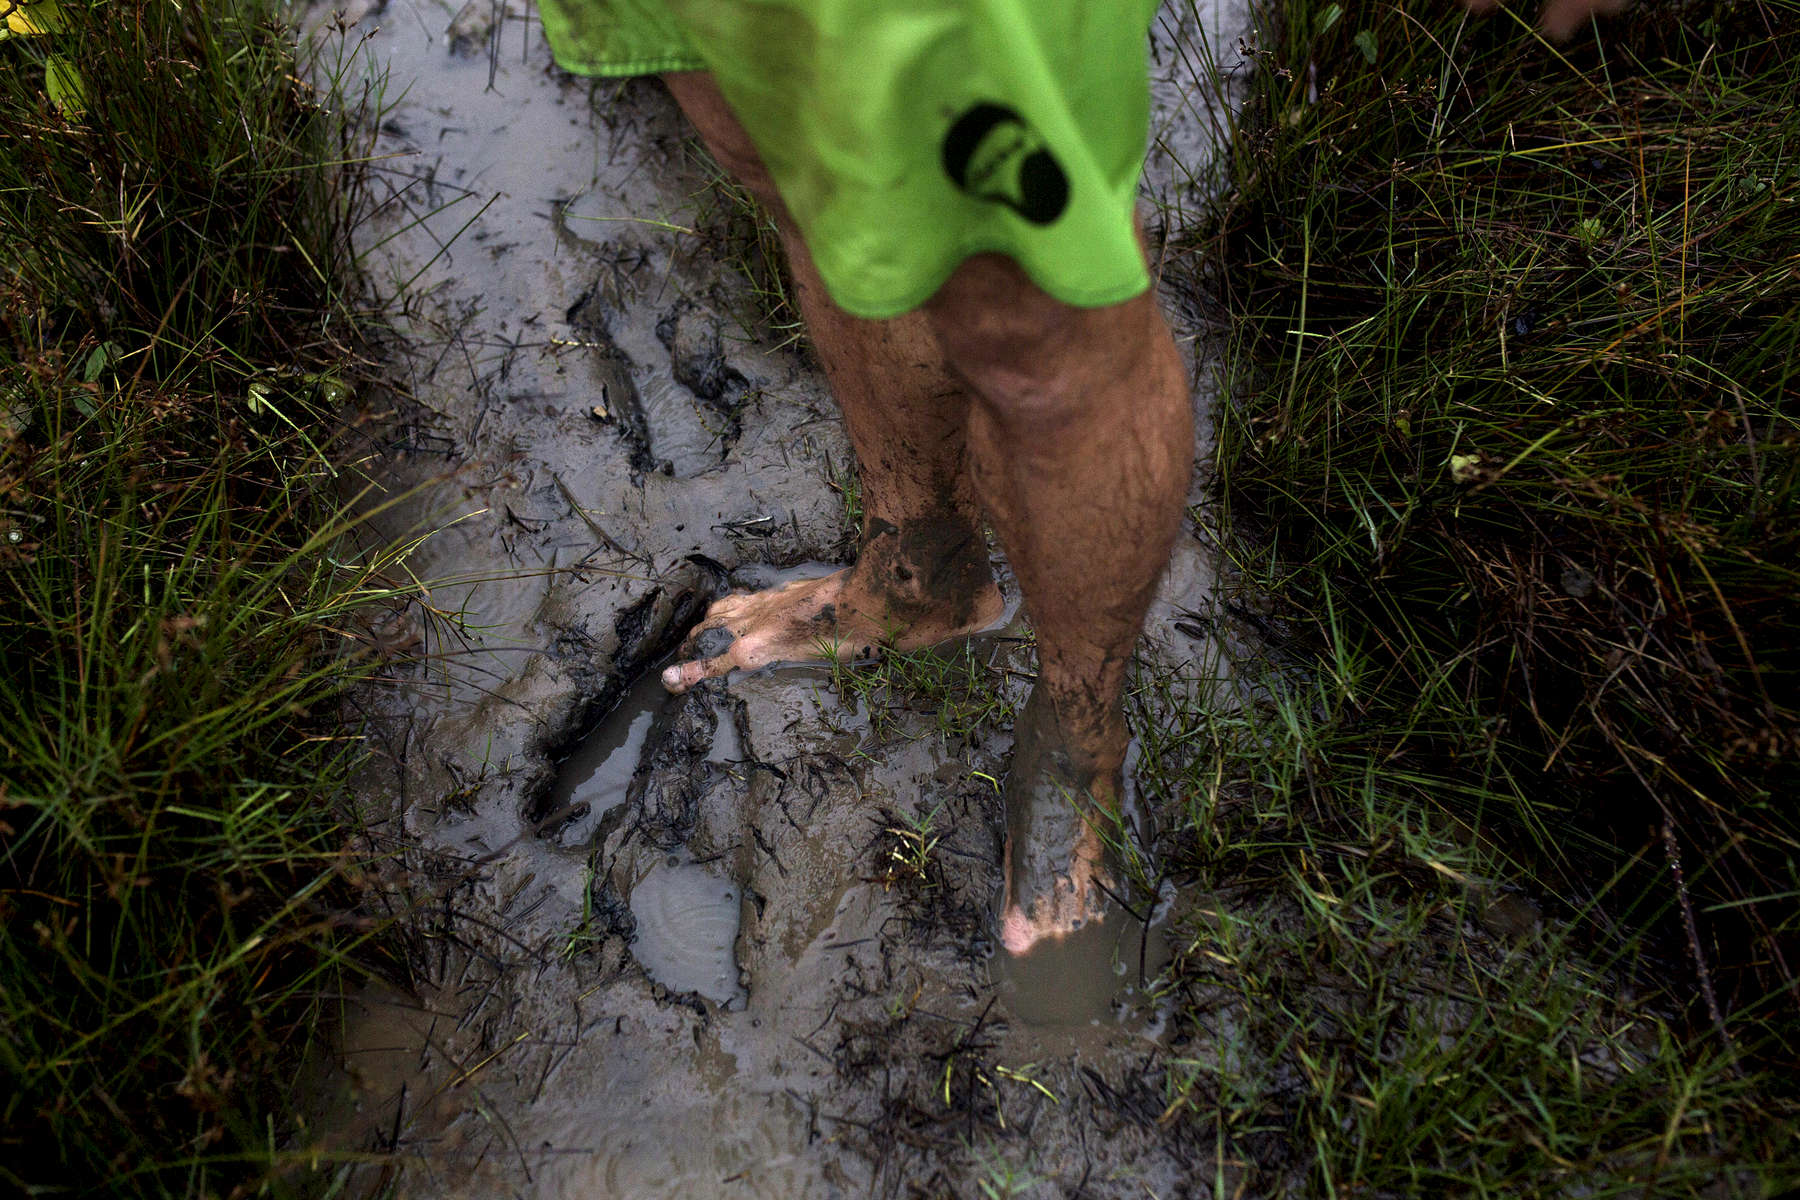 Ivan Moreira's muddy feet on the shore of the Amazon River.